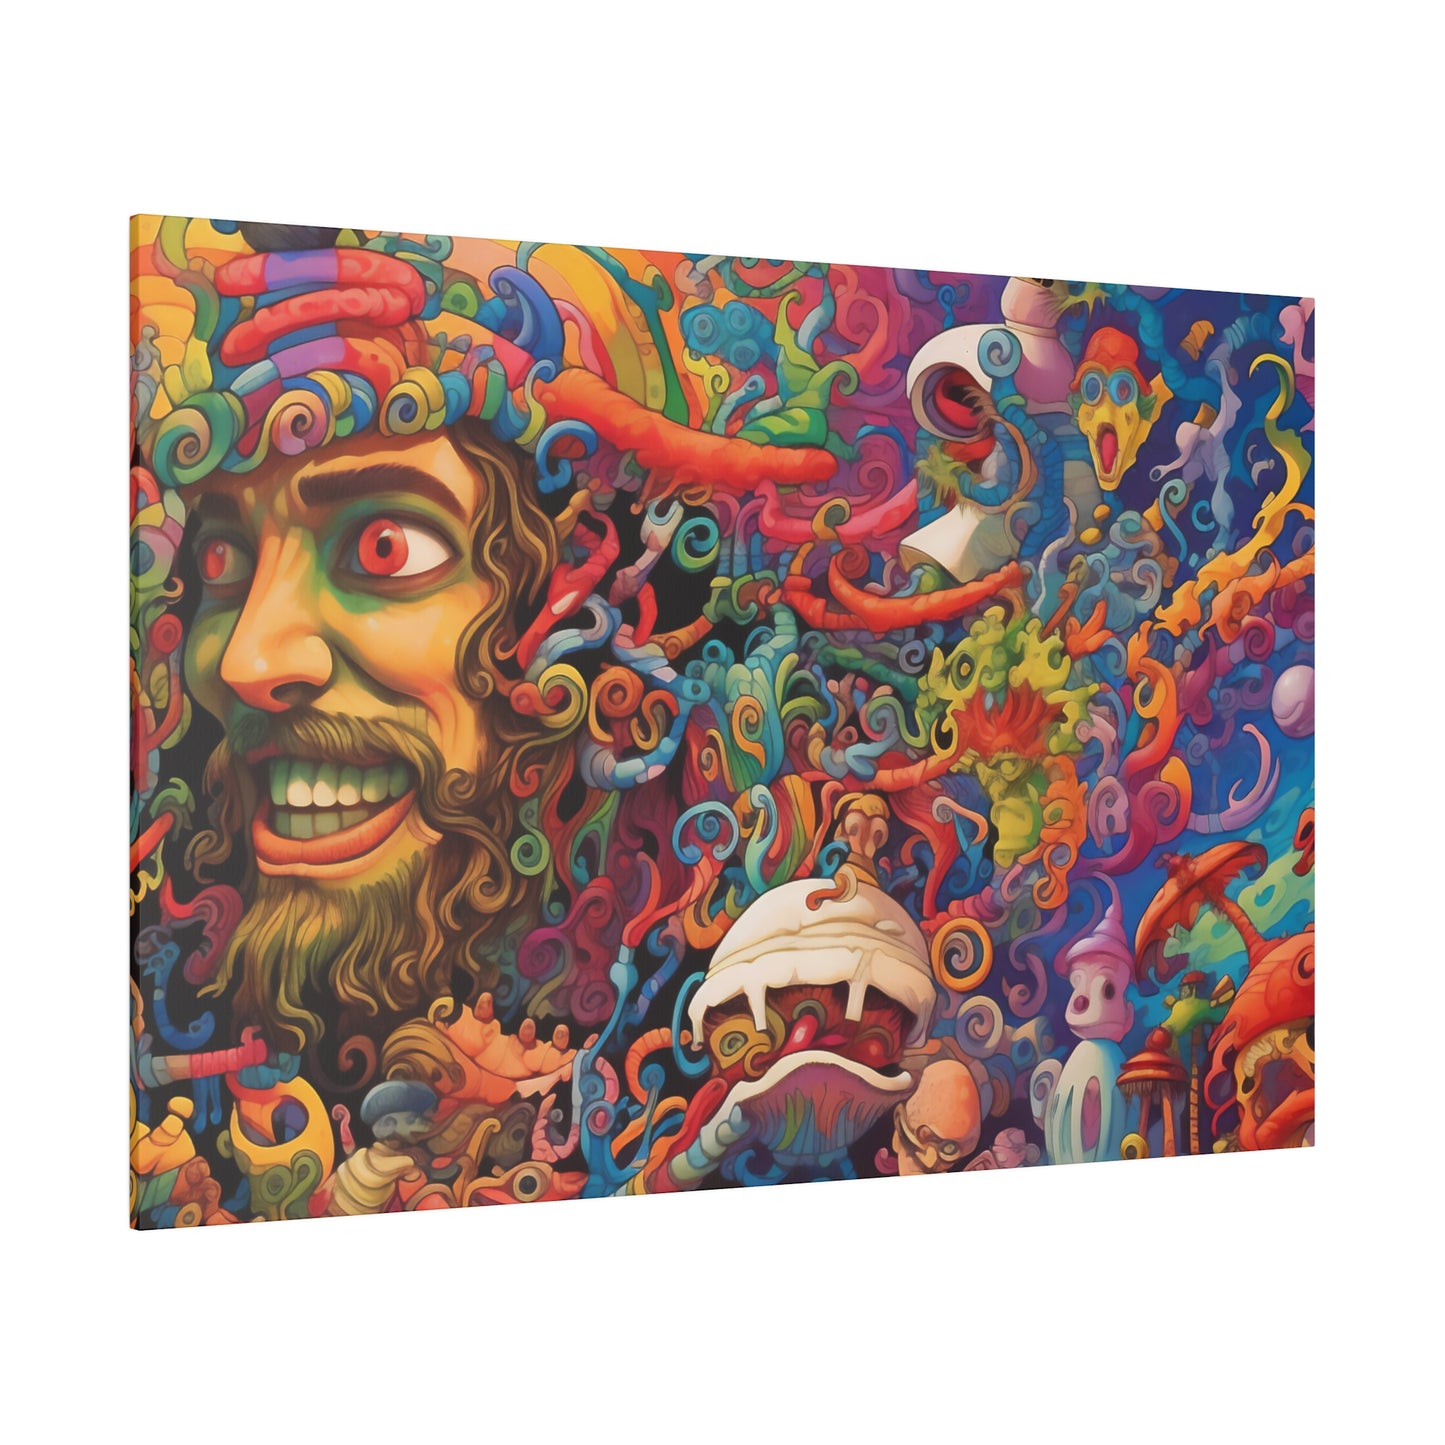 Psychedelic Experience Art | Stretched Canvas Print